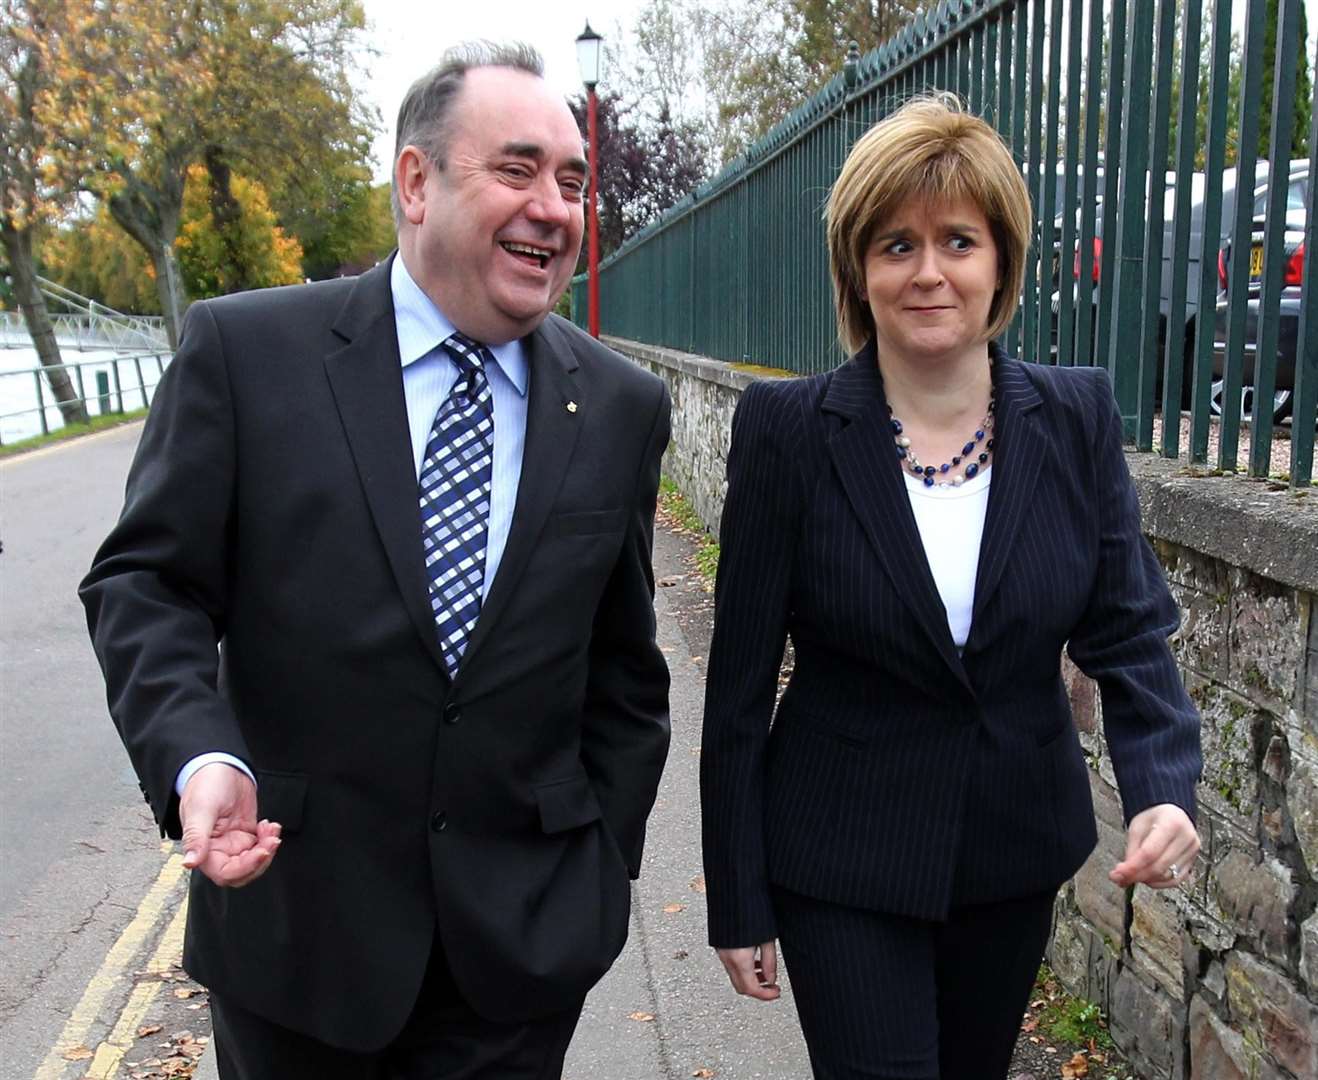 Nicola Sturgeon replaced Alex Salmond as First Minister in 2014 (Andrew Milligan/PA)